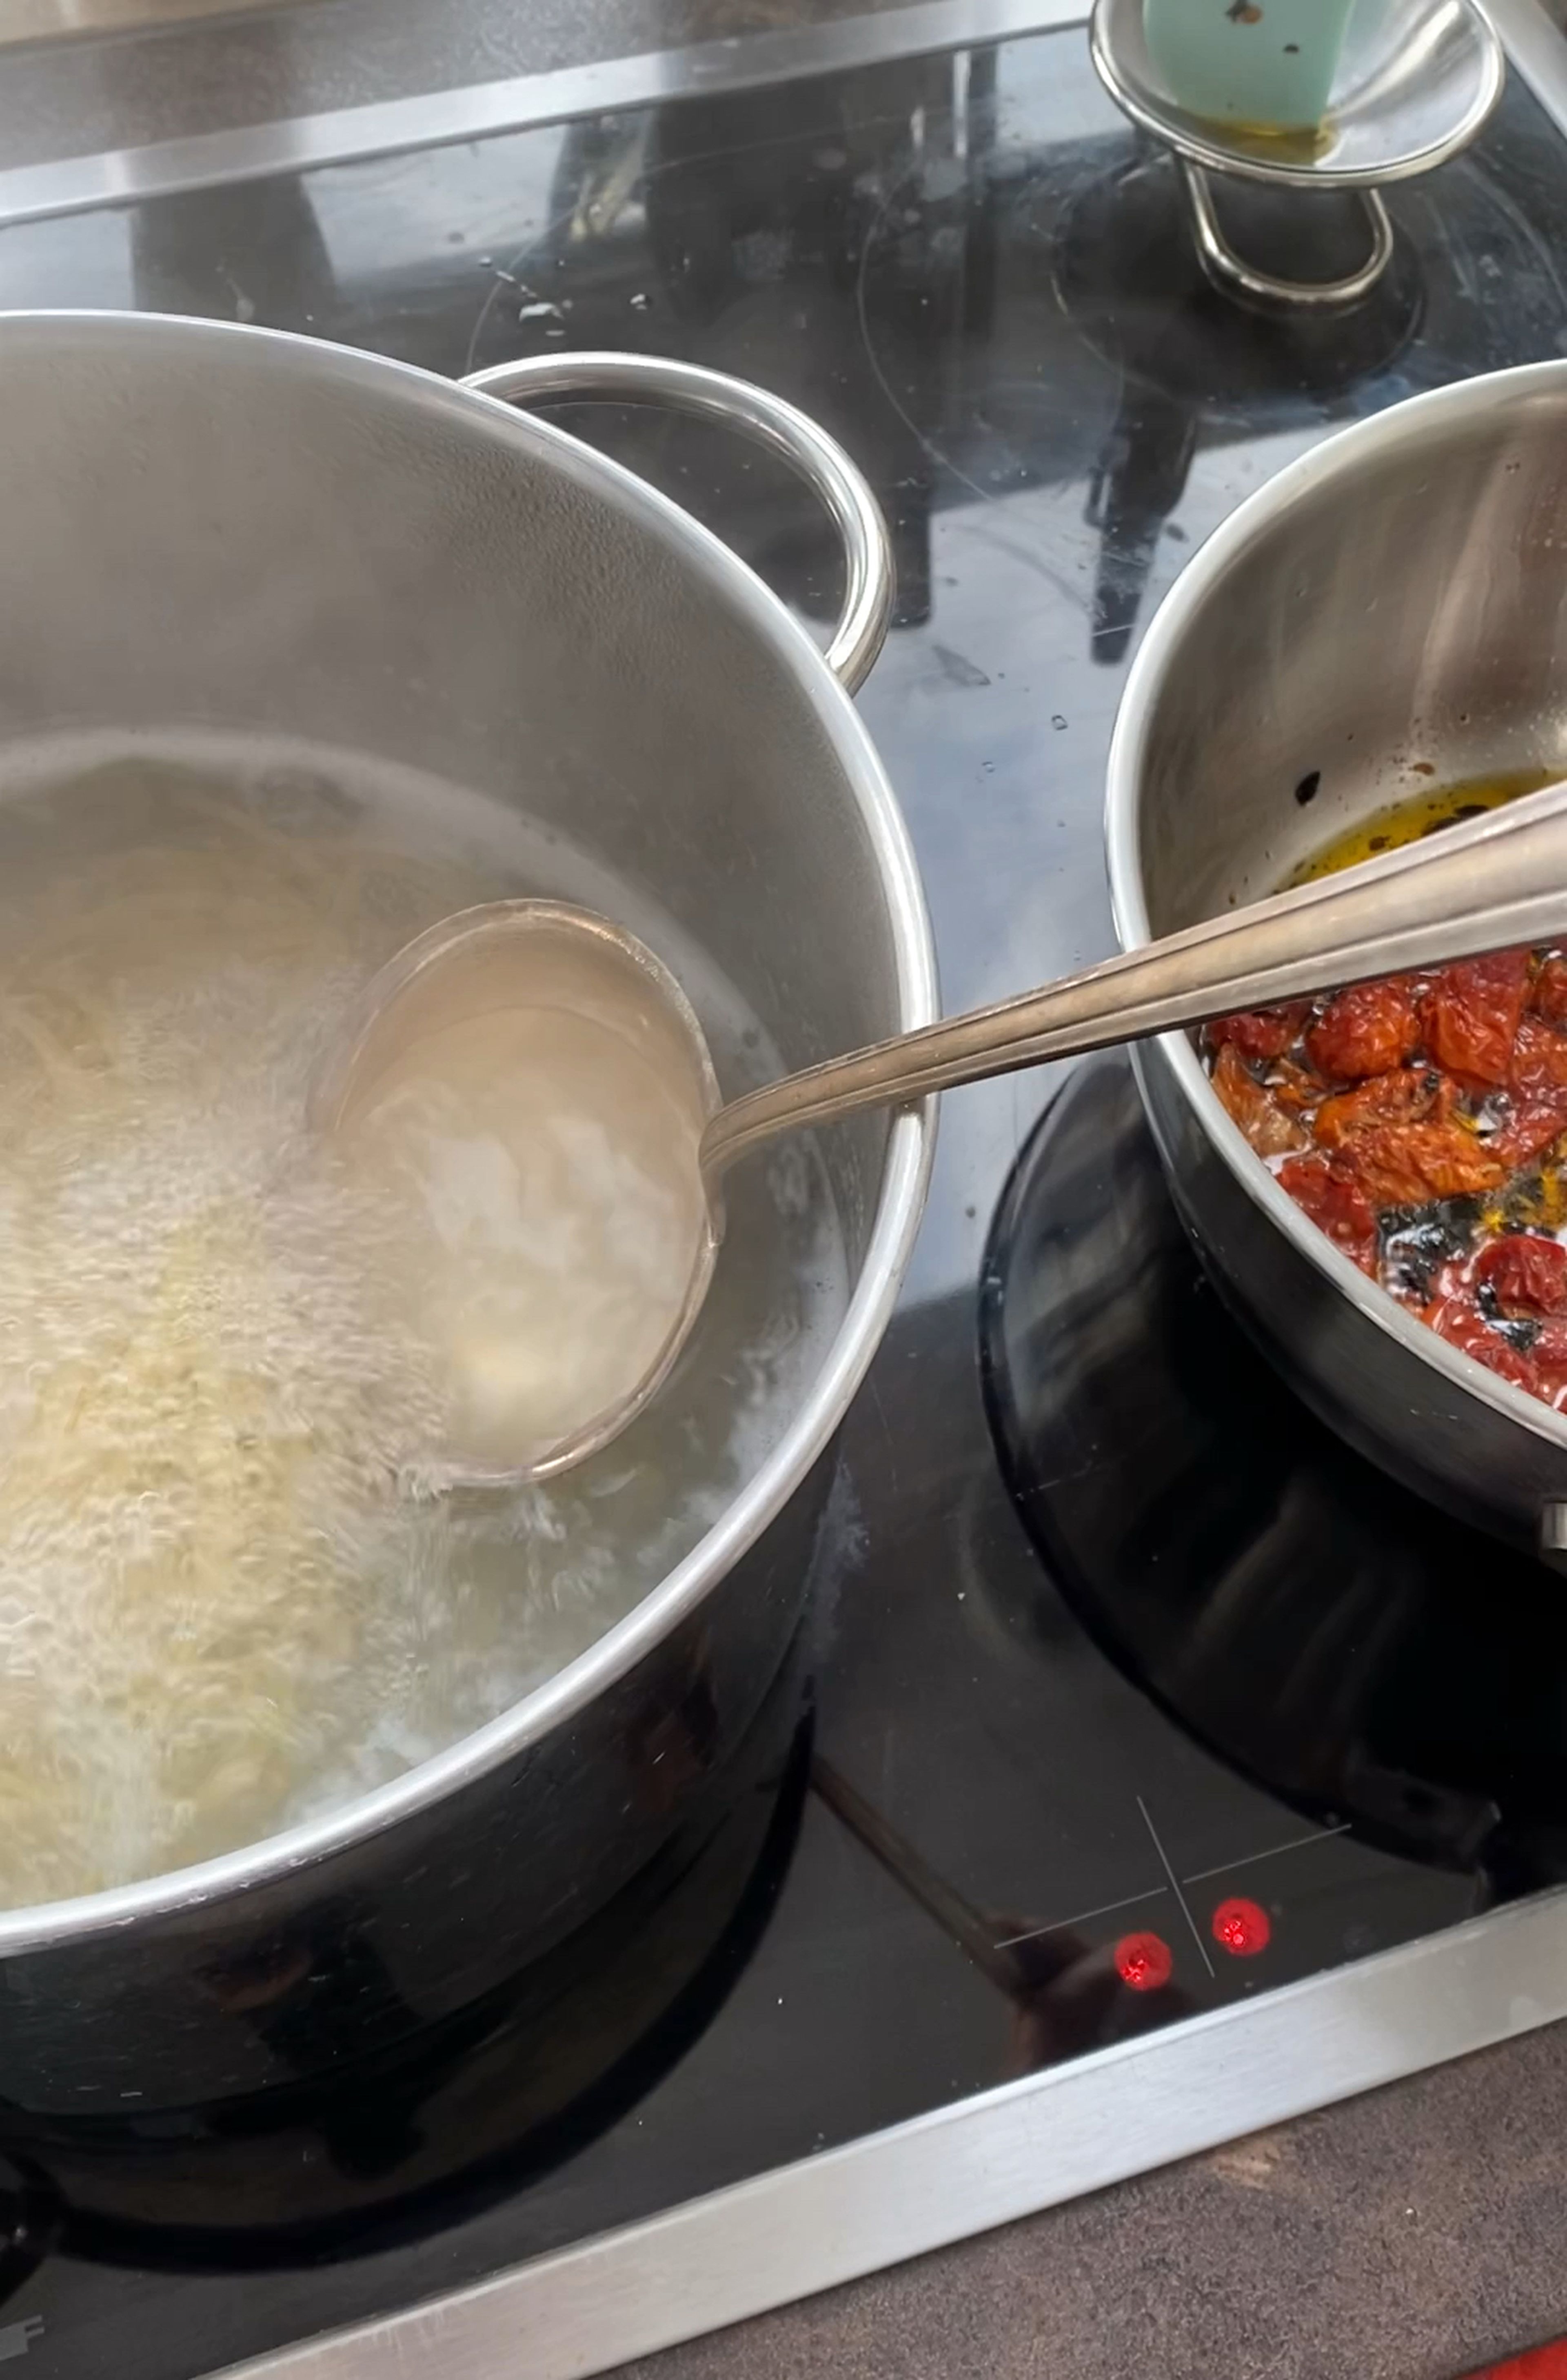 Right before the pasta is ready, use a big soup ladle to transfer some of the salted pasta-water to the pan (approx. 1-2 times). Stir in the water and put the pan on high heat to reduce the liquid.